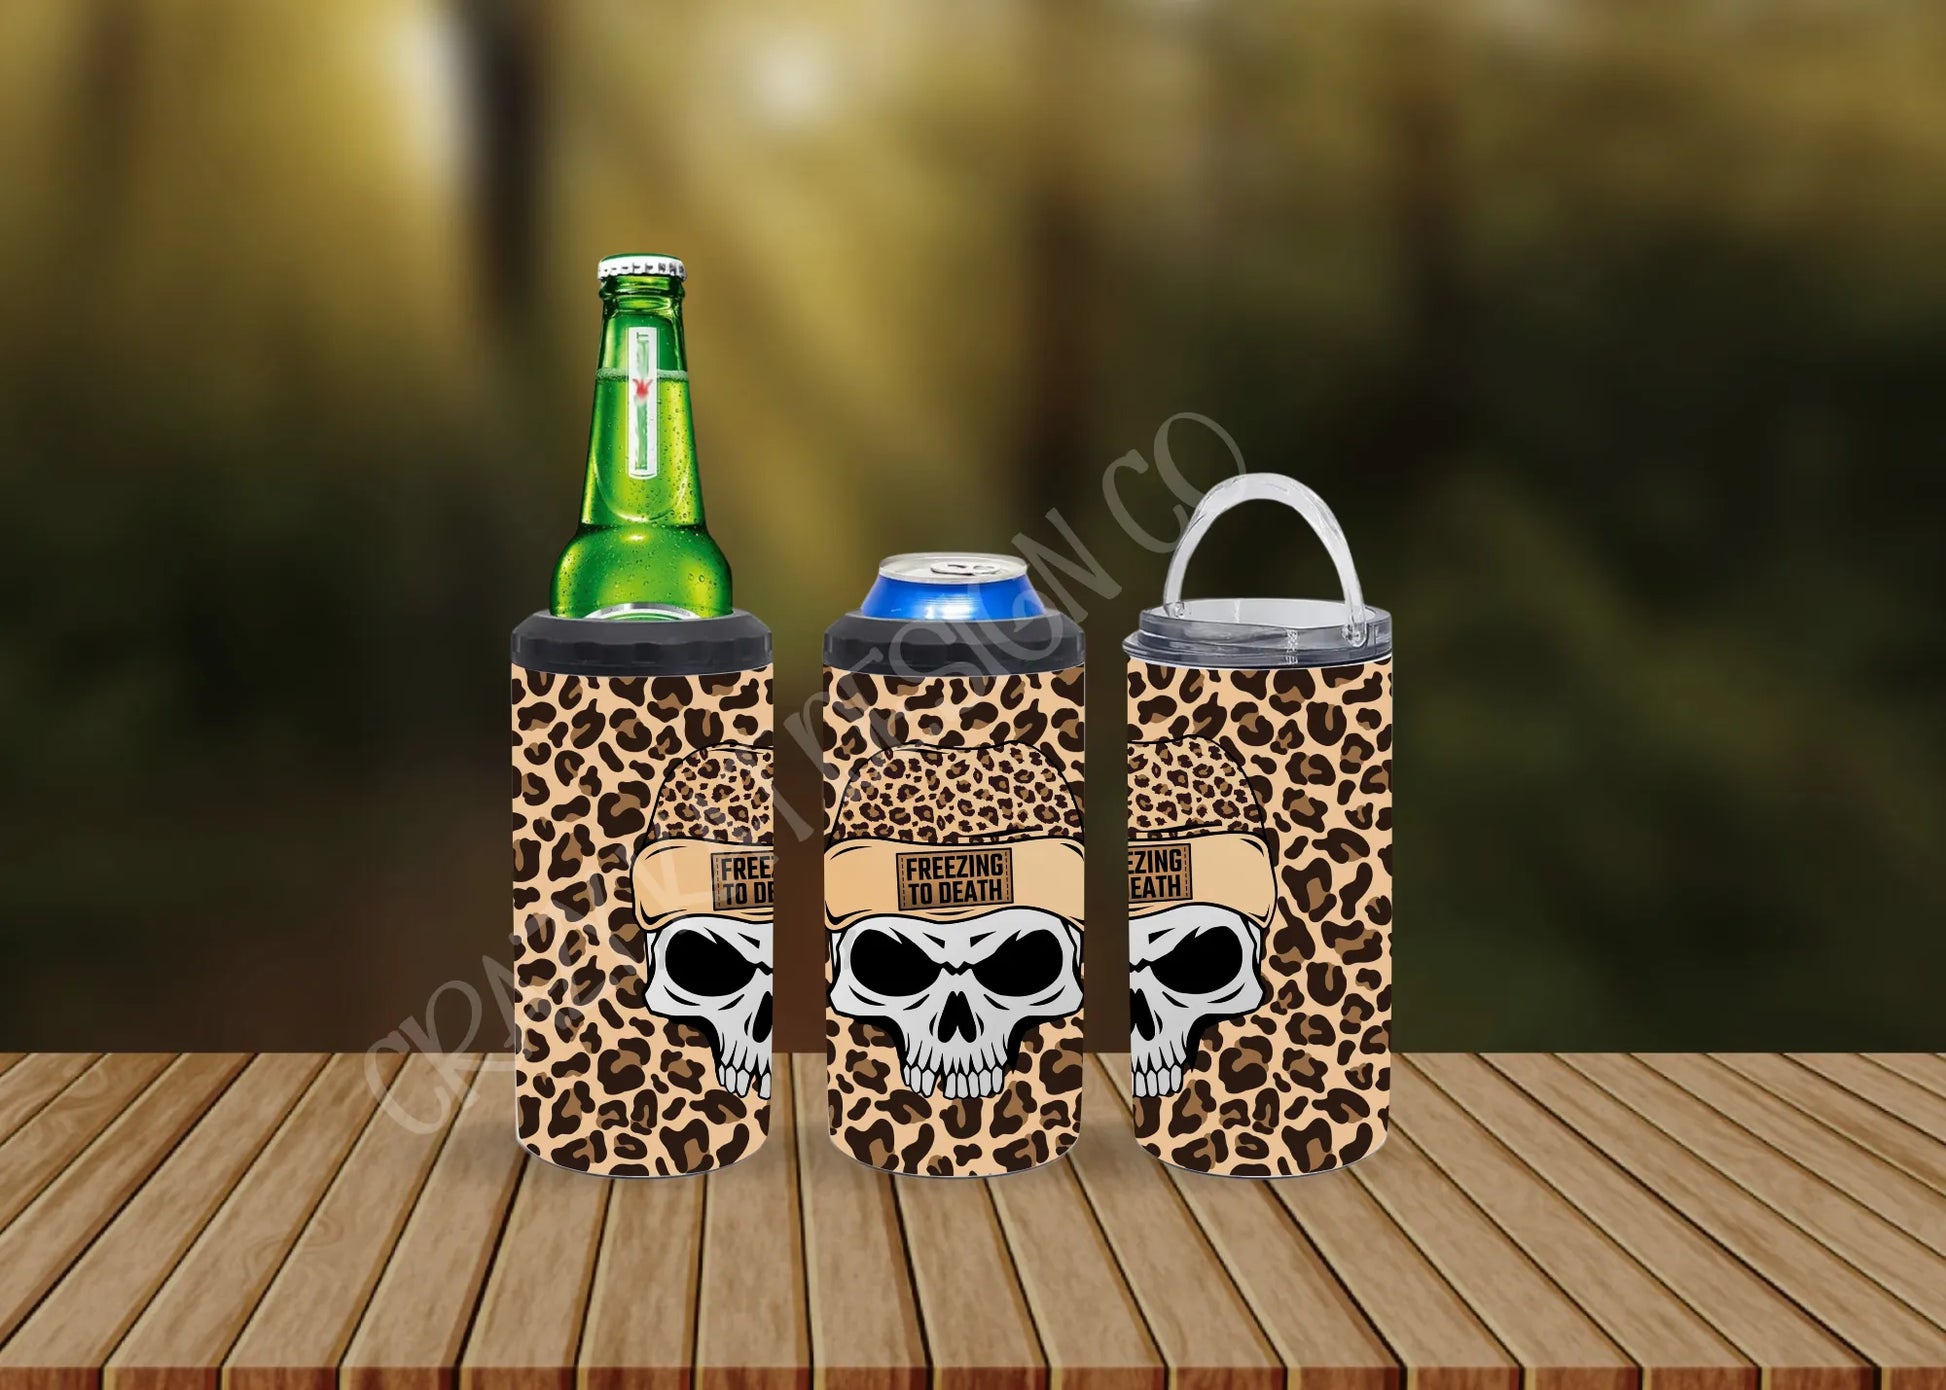 CUSTOMIZABLE FREEZING TO DEATH SKULLS HOT AND COLD TUMBLERS - Crazy Kat Design Co